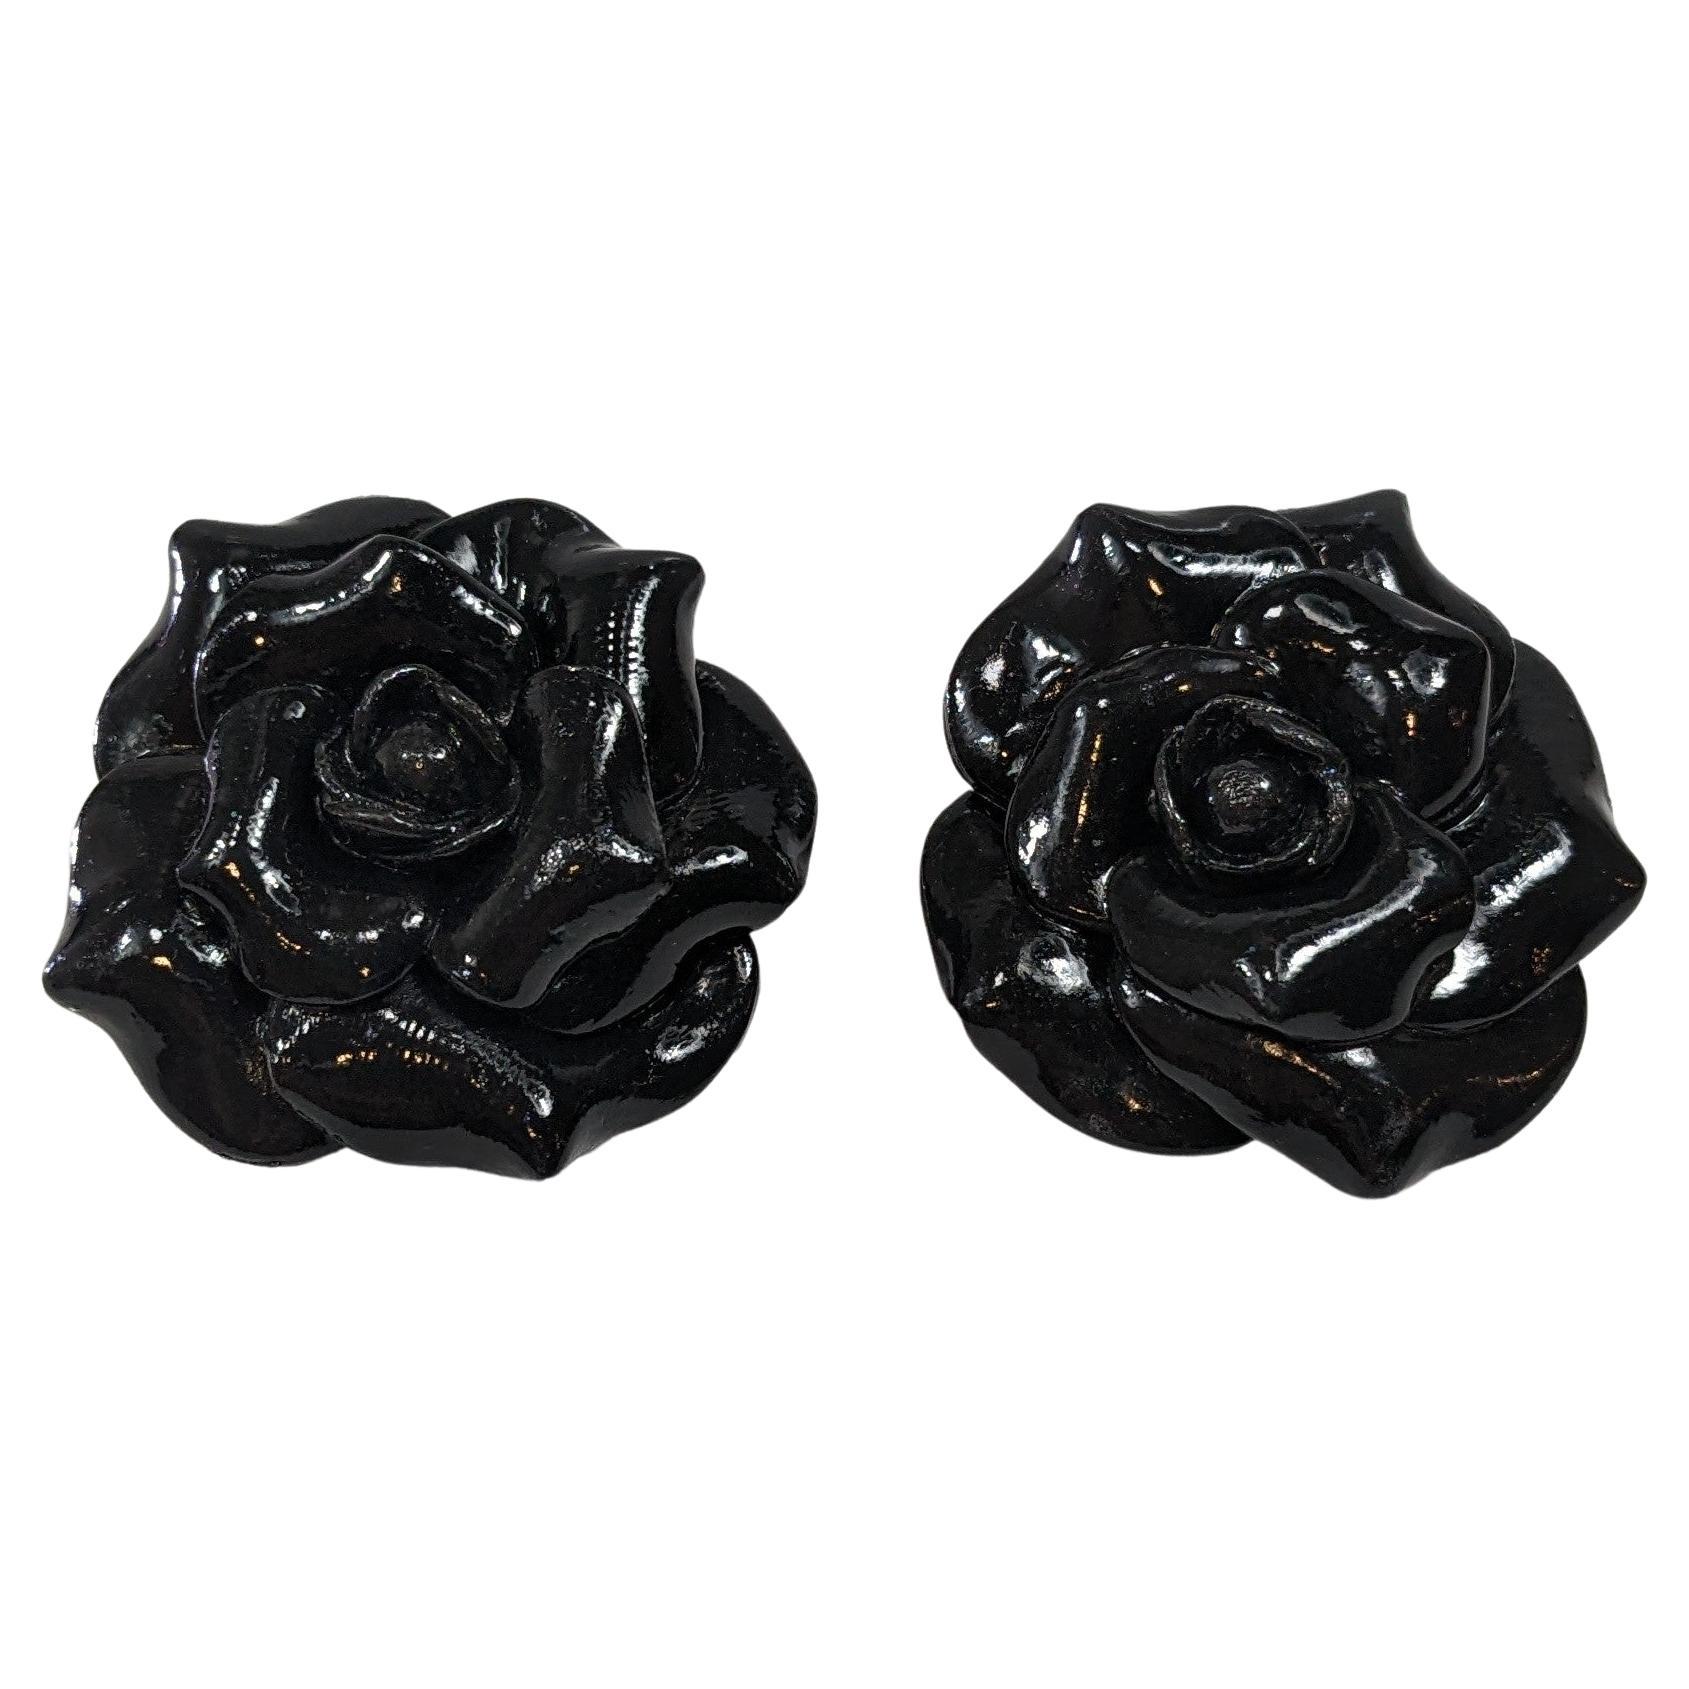  Black Camelia Polymer  Earrings with golplated silver closure